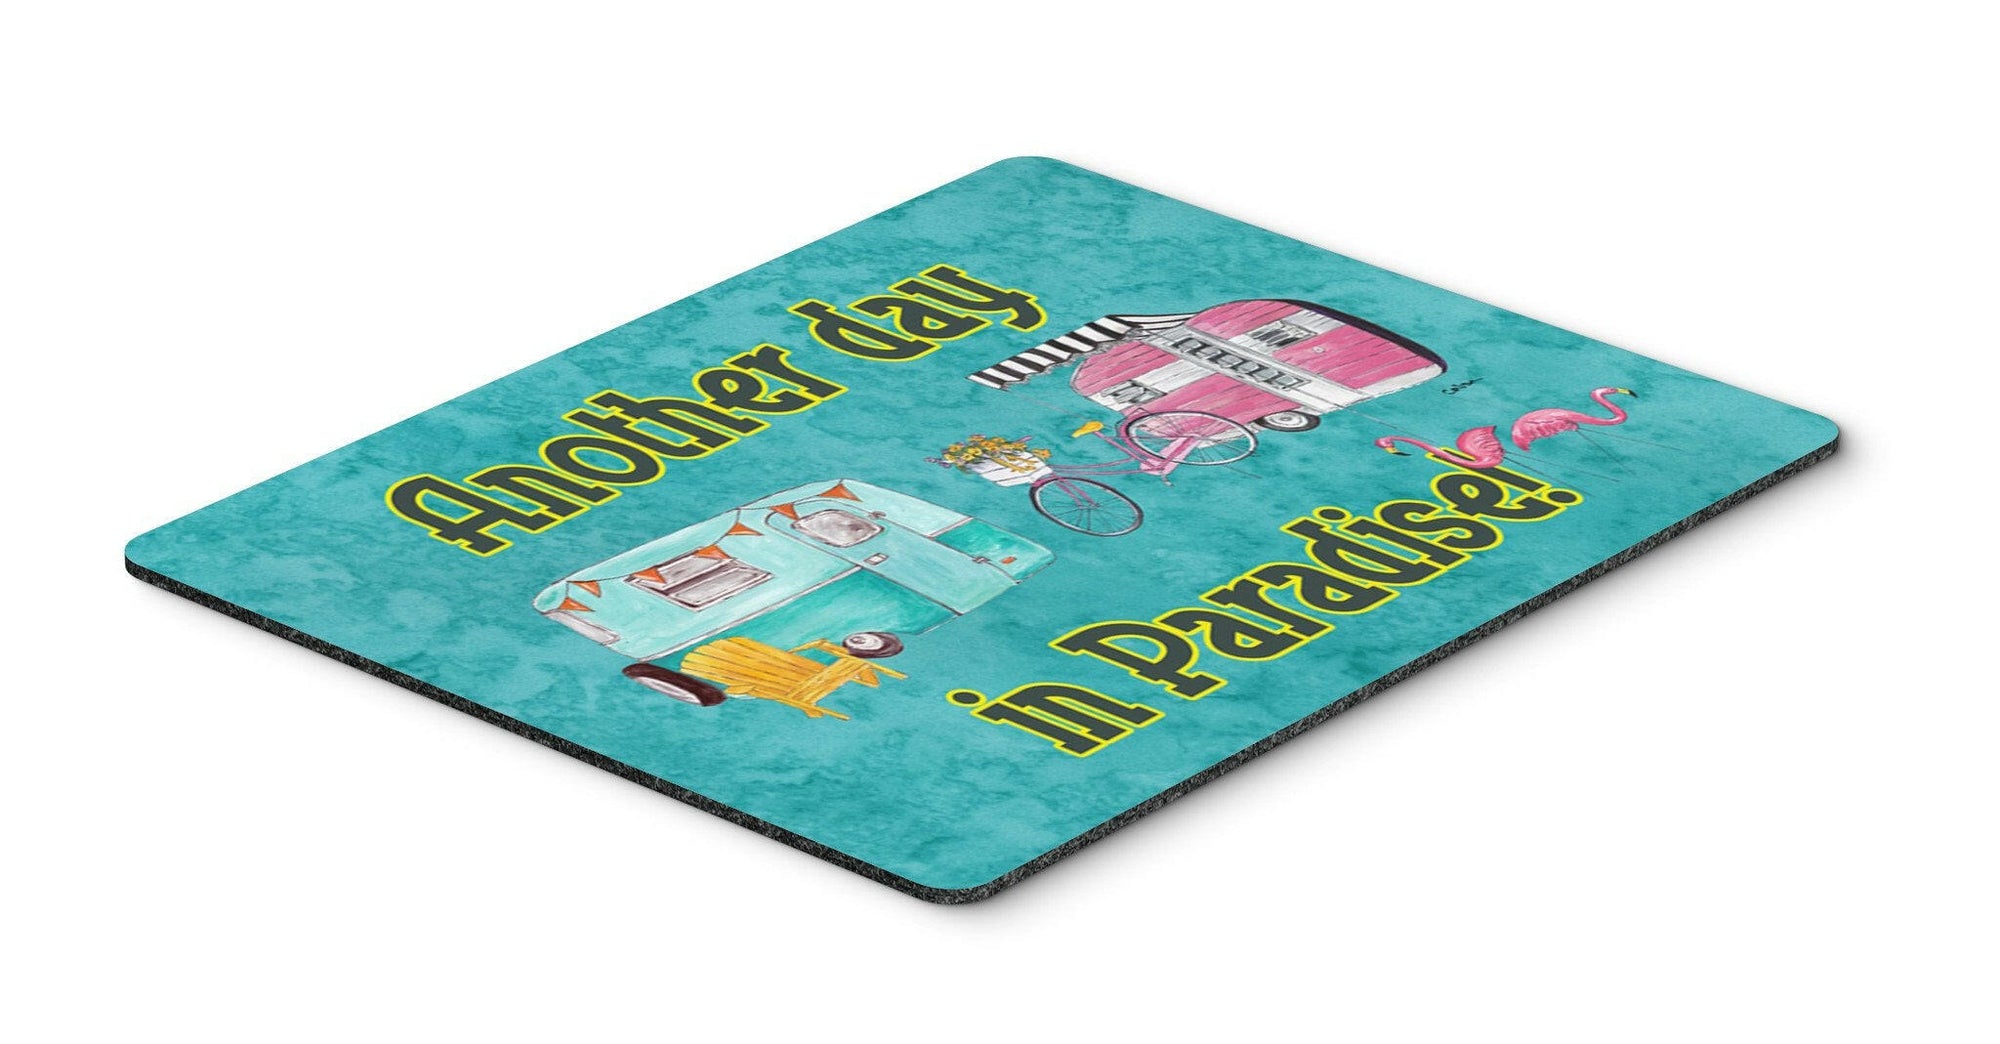 Another Day in Paradise Mouse Pad, Hot Pad or Trivet by Caroline's Treasures